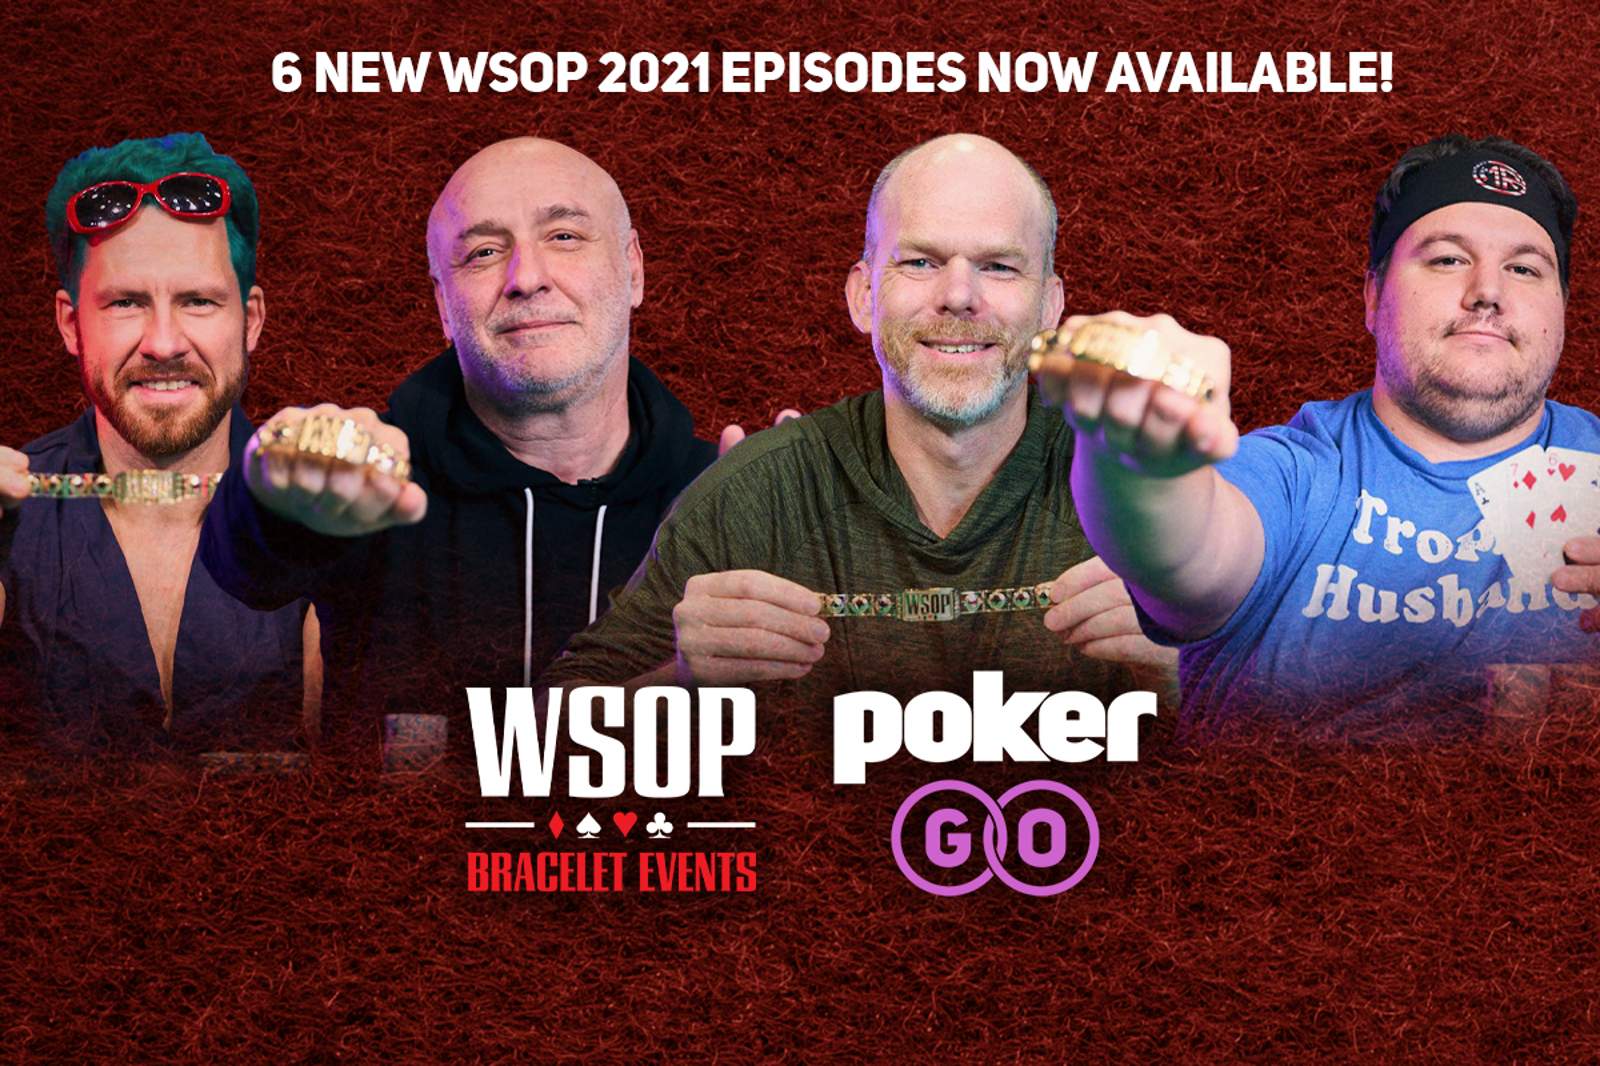 Episodes 23-28 Now Available from 2021 WSOP Bracelet Events